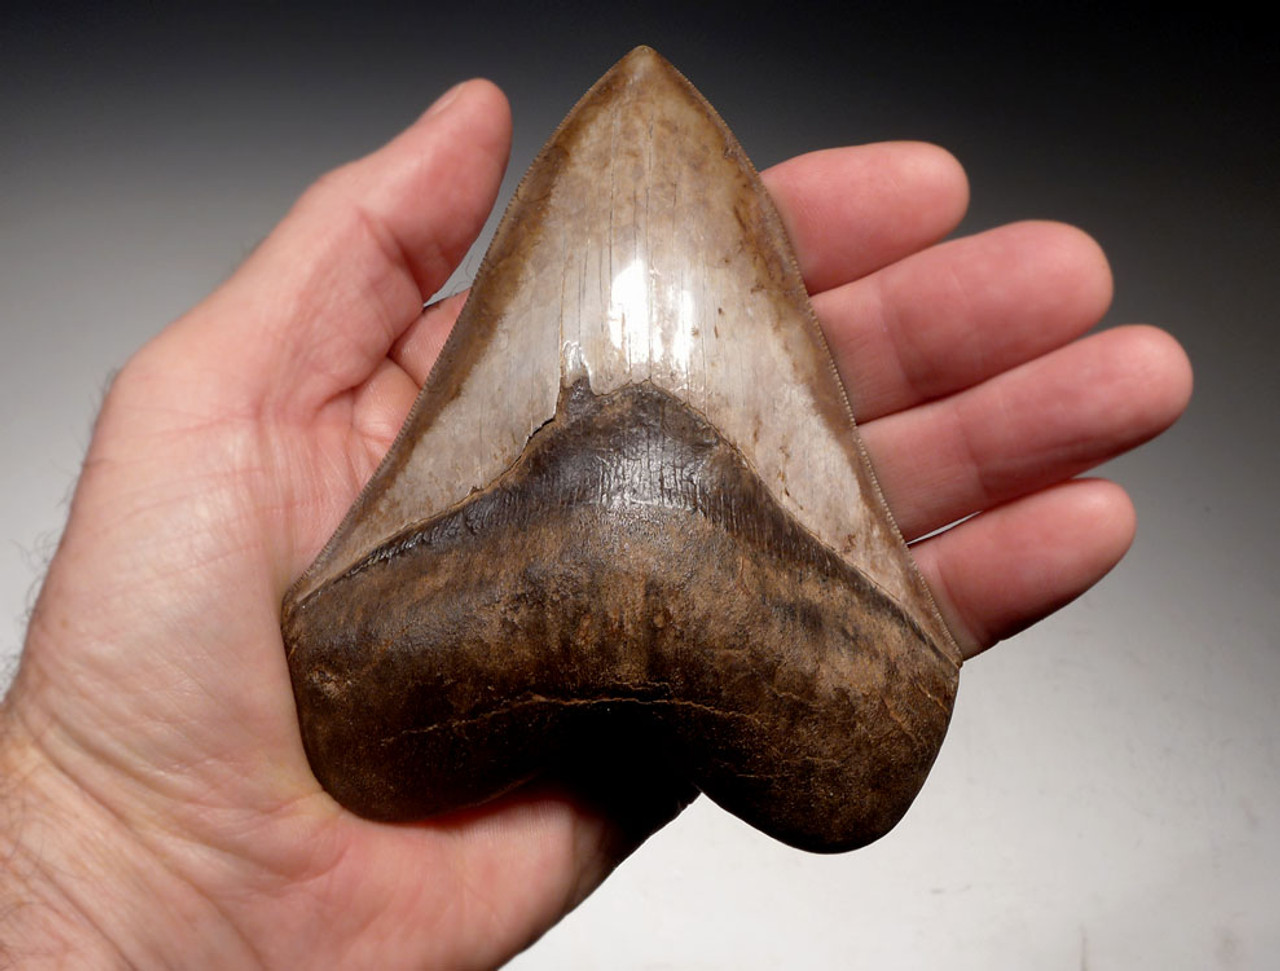 COLLECTOR GRADE SPOTTED PEARLESCENT COPPER BROWN 4.65 INCH MEGALODON SHARK TOOTH *SH6-364